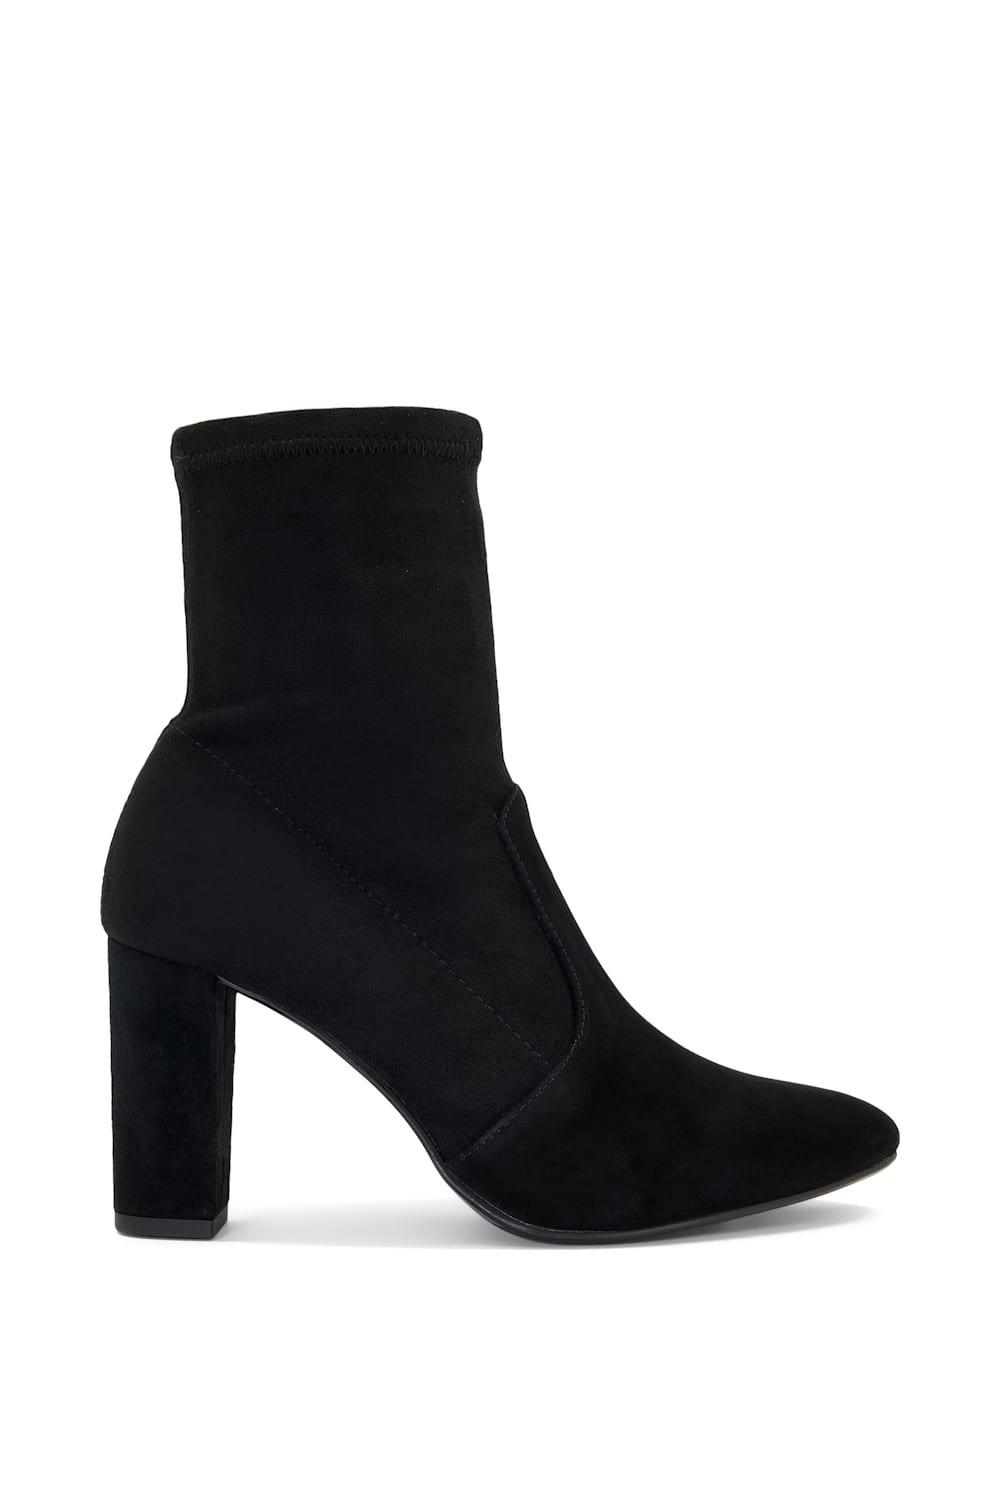 Boots | Wide Fit 'Optical' Suede Ankle Boots | Dune London